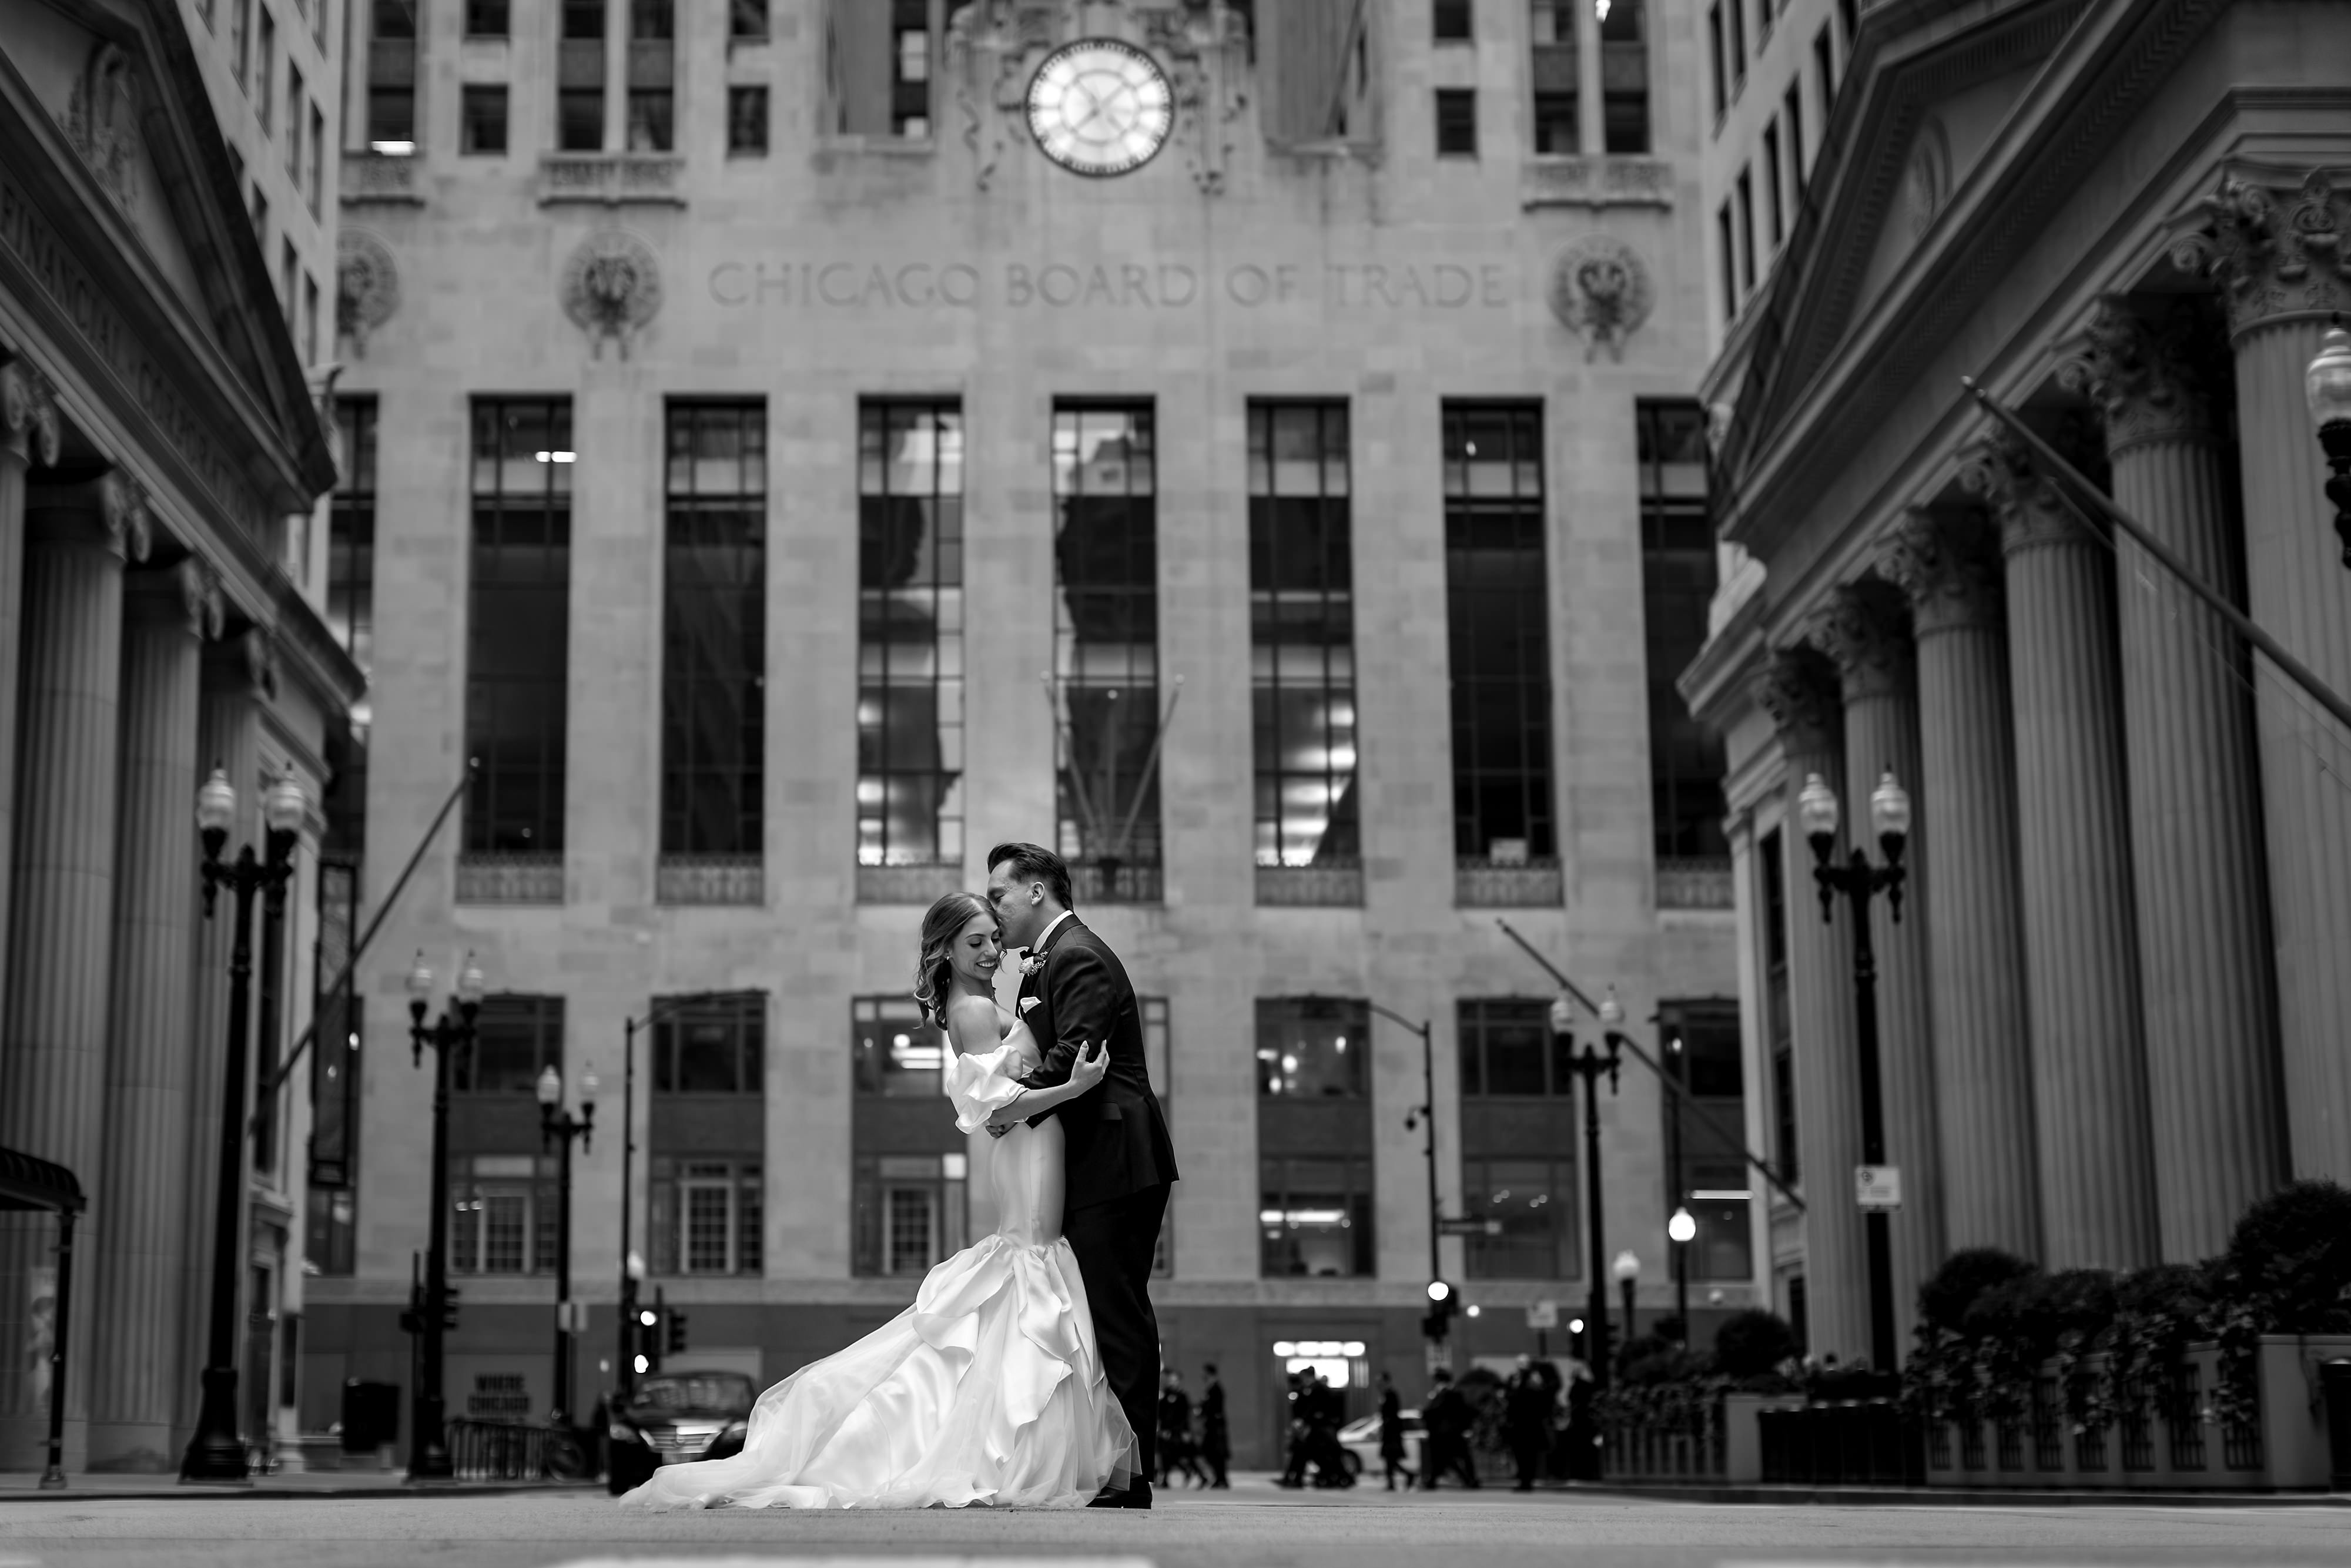 Black and White Portrait of Bride and Groom in front of Board of Trade Building on LaSalle Street in Chicago